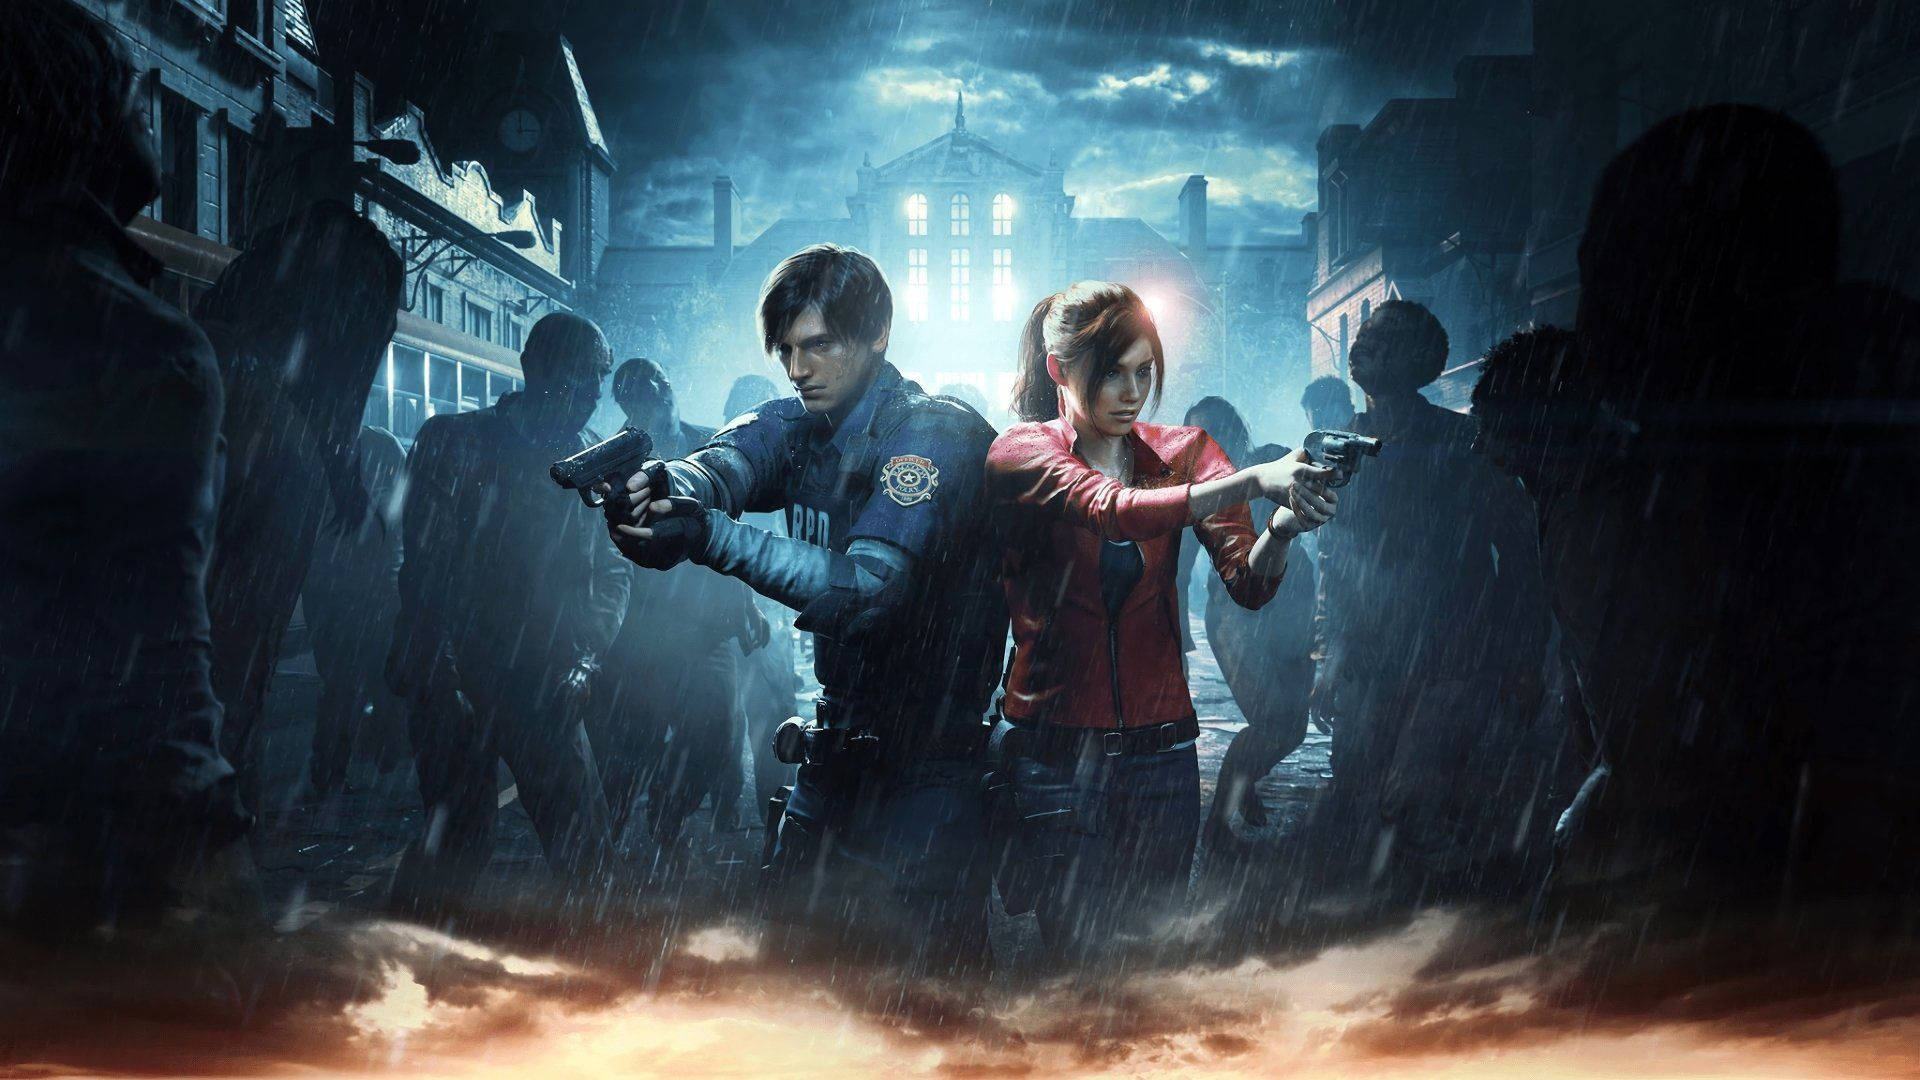 Leon and Claire brave the elements in Resident Evil 2 Wallpaper